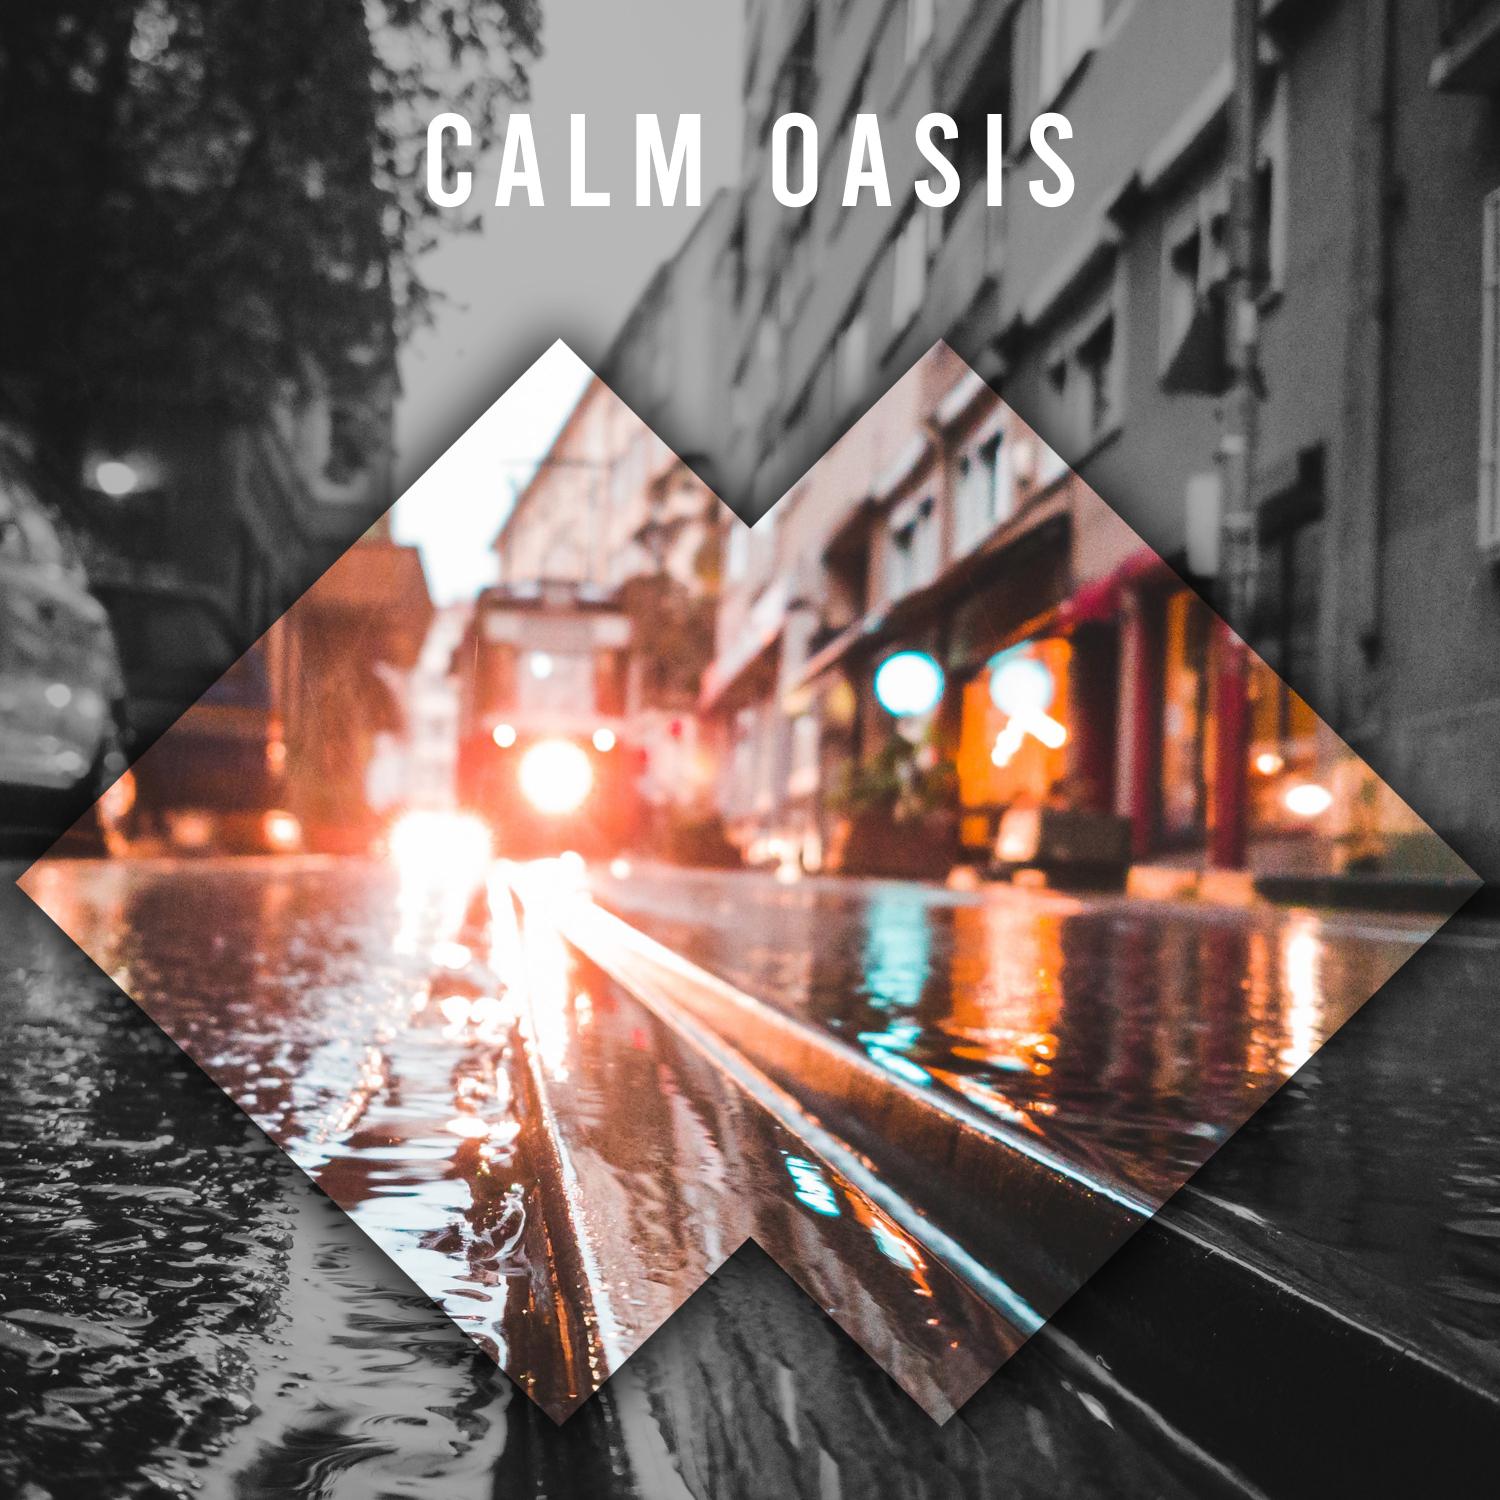 2018 Calm Oasis Tracks to Relax and Unwind